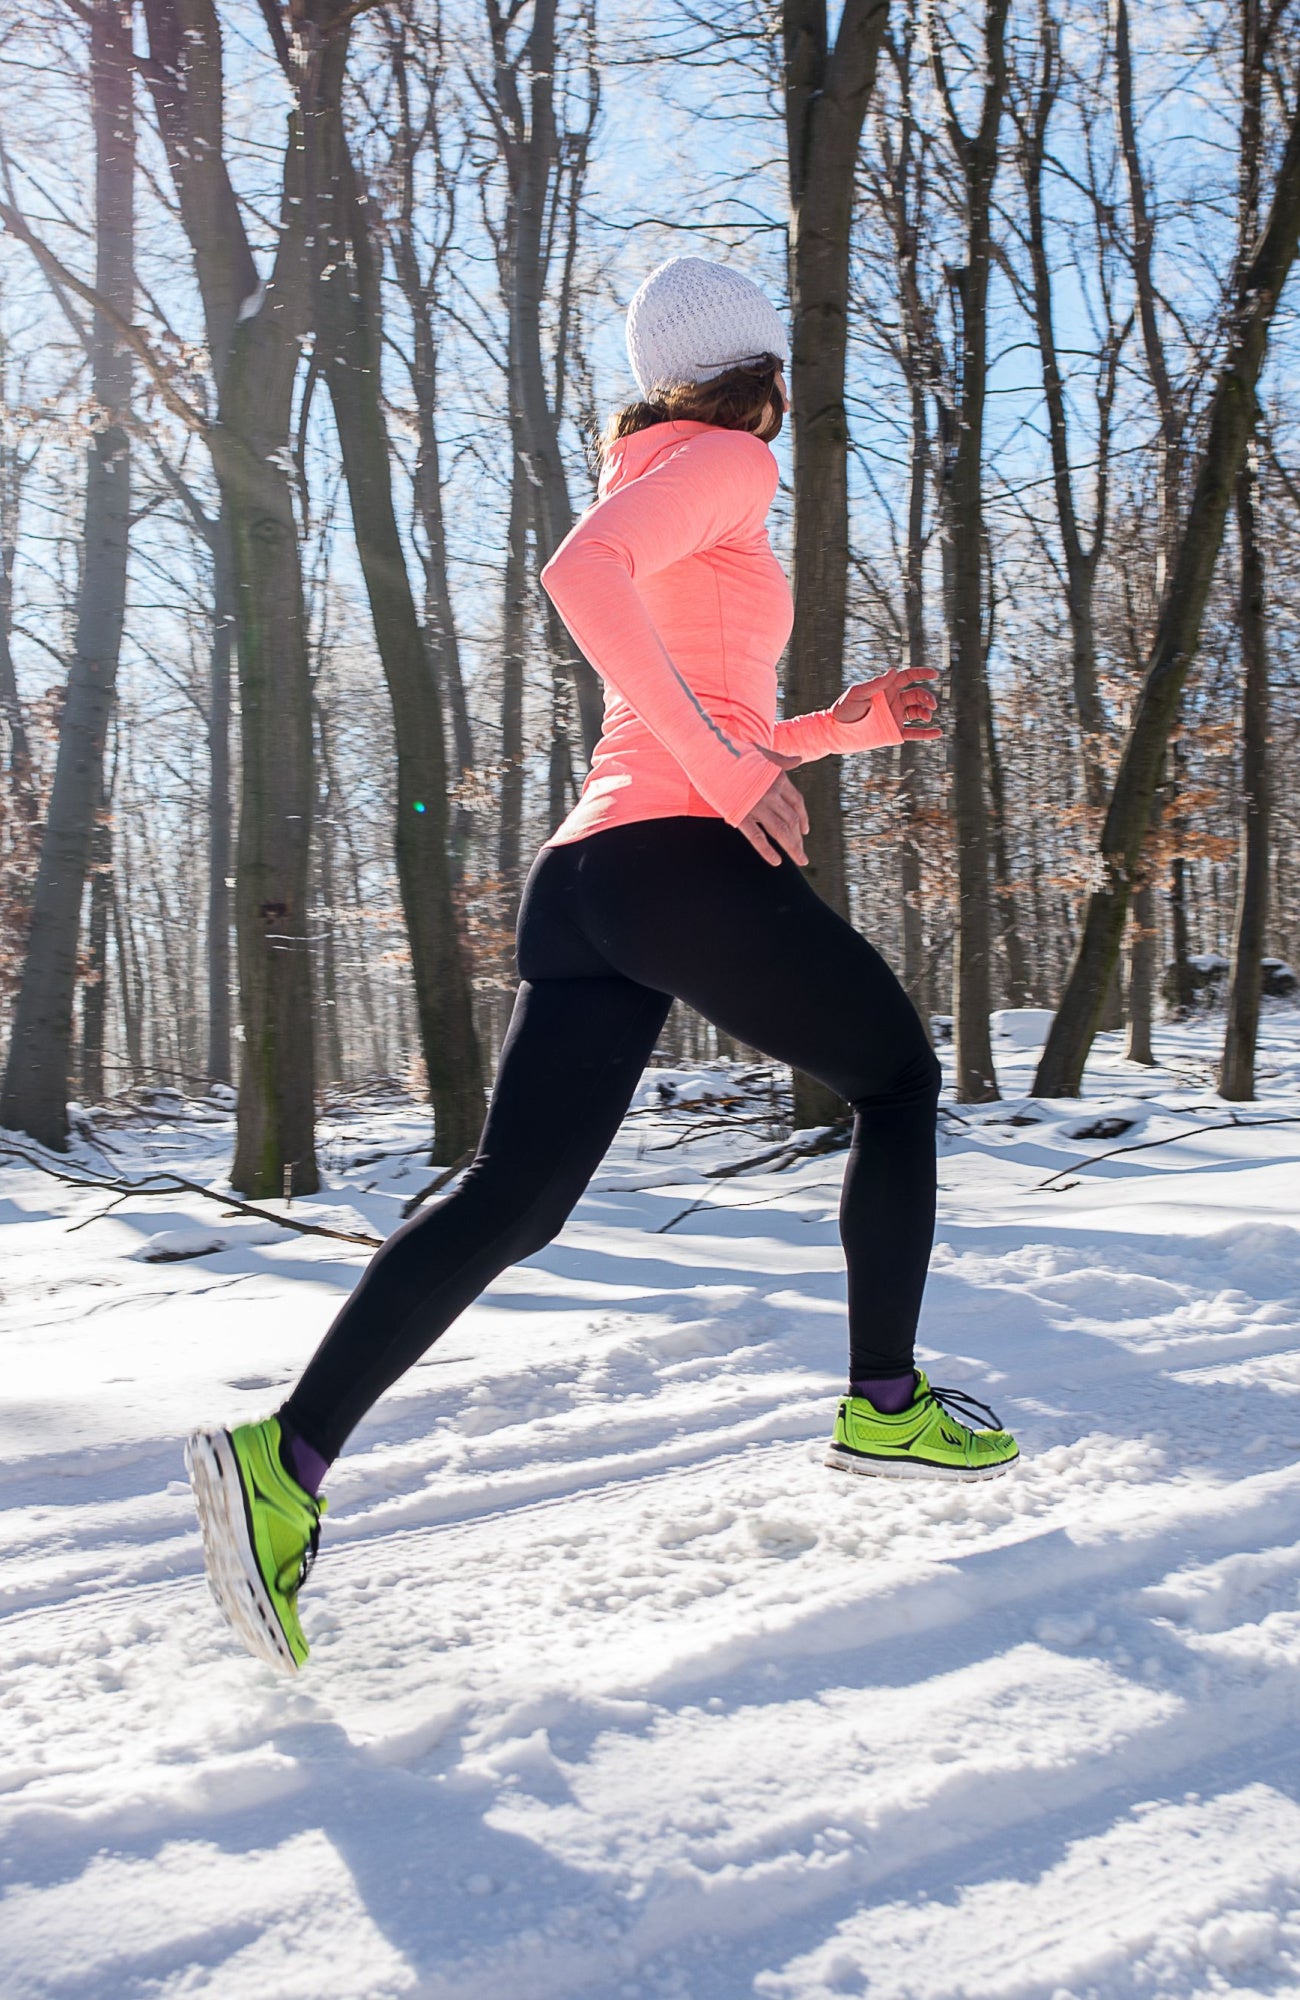 Cold Weather Running Gear Guide